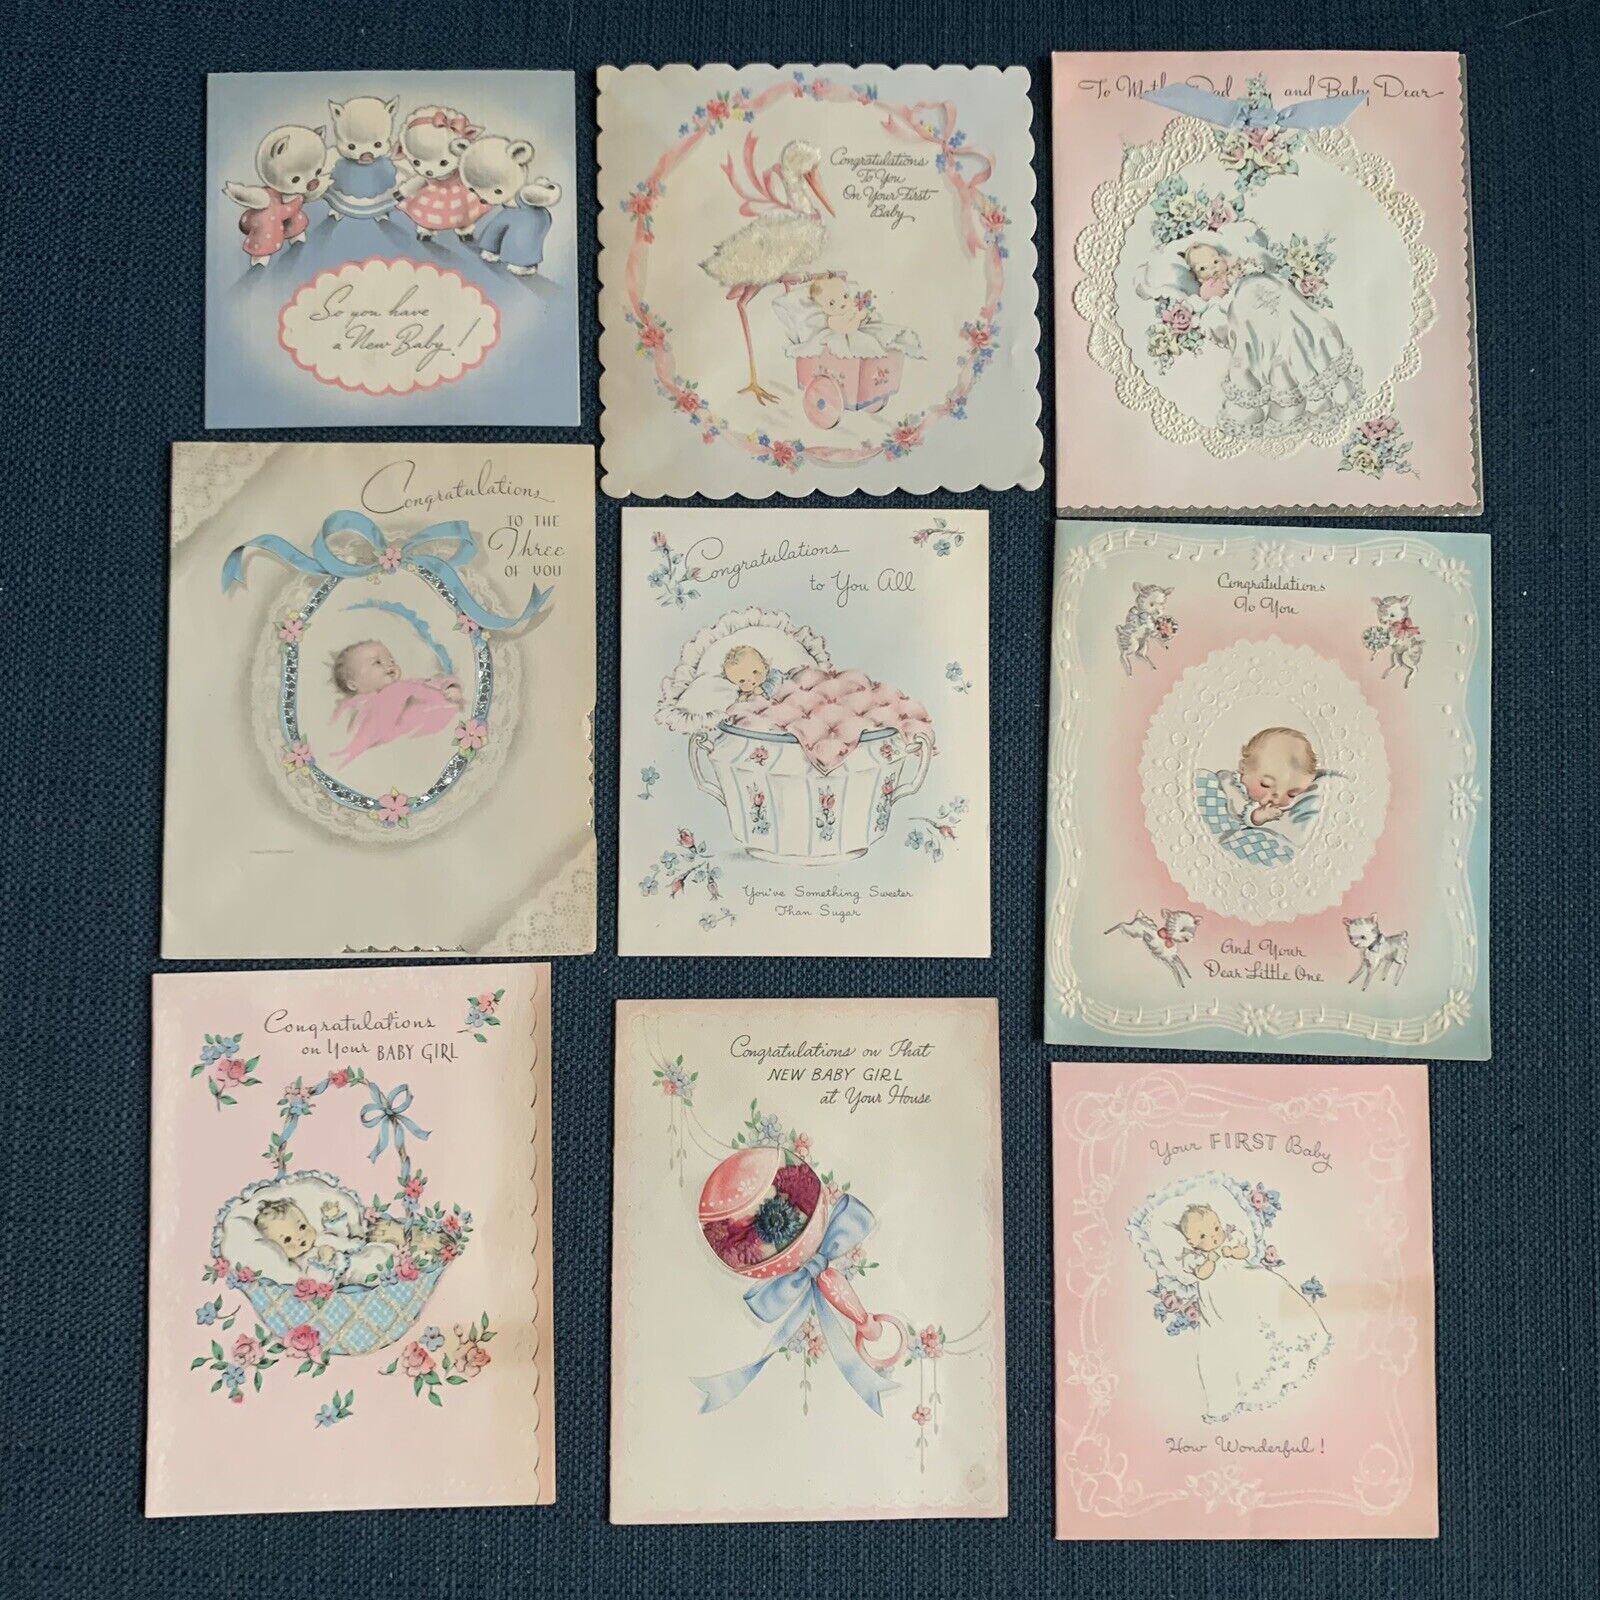 Vintage 1940s New Baby Congratulations Cards Used Lot of 10